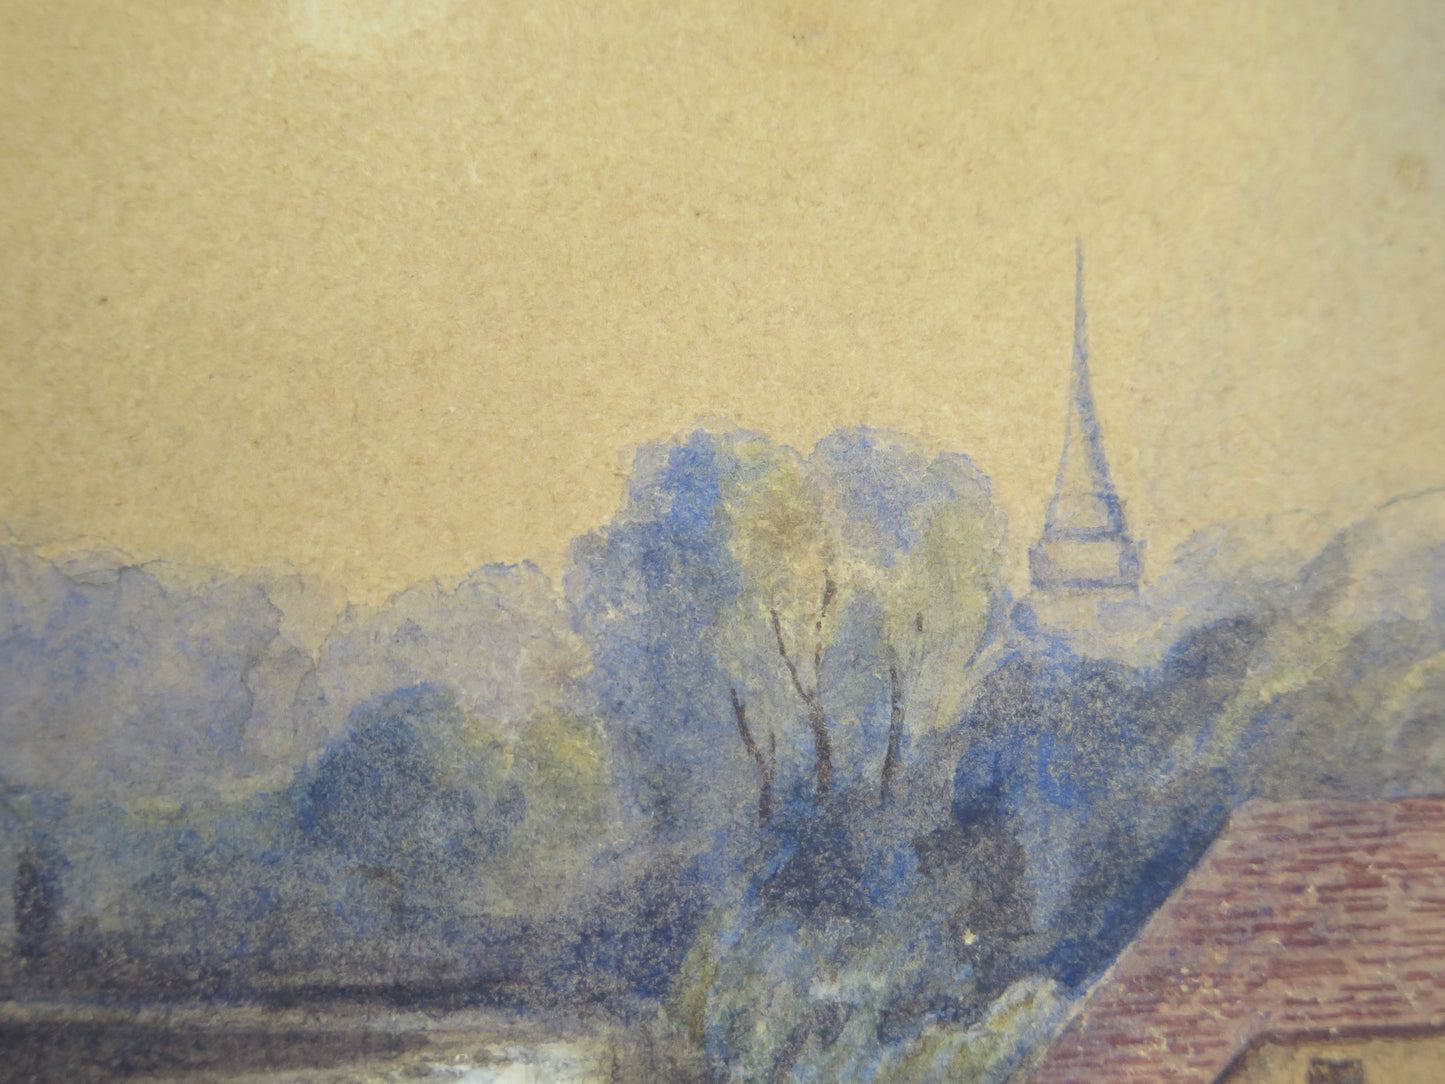 Antique landscape painting by the river painted in watercolor on paper with a gilded wooden frame